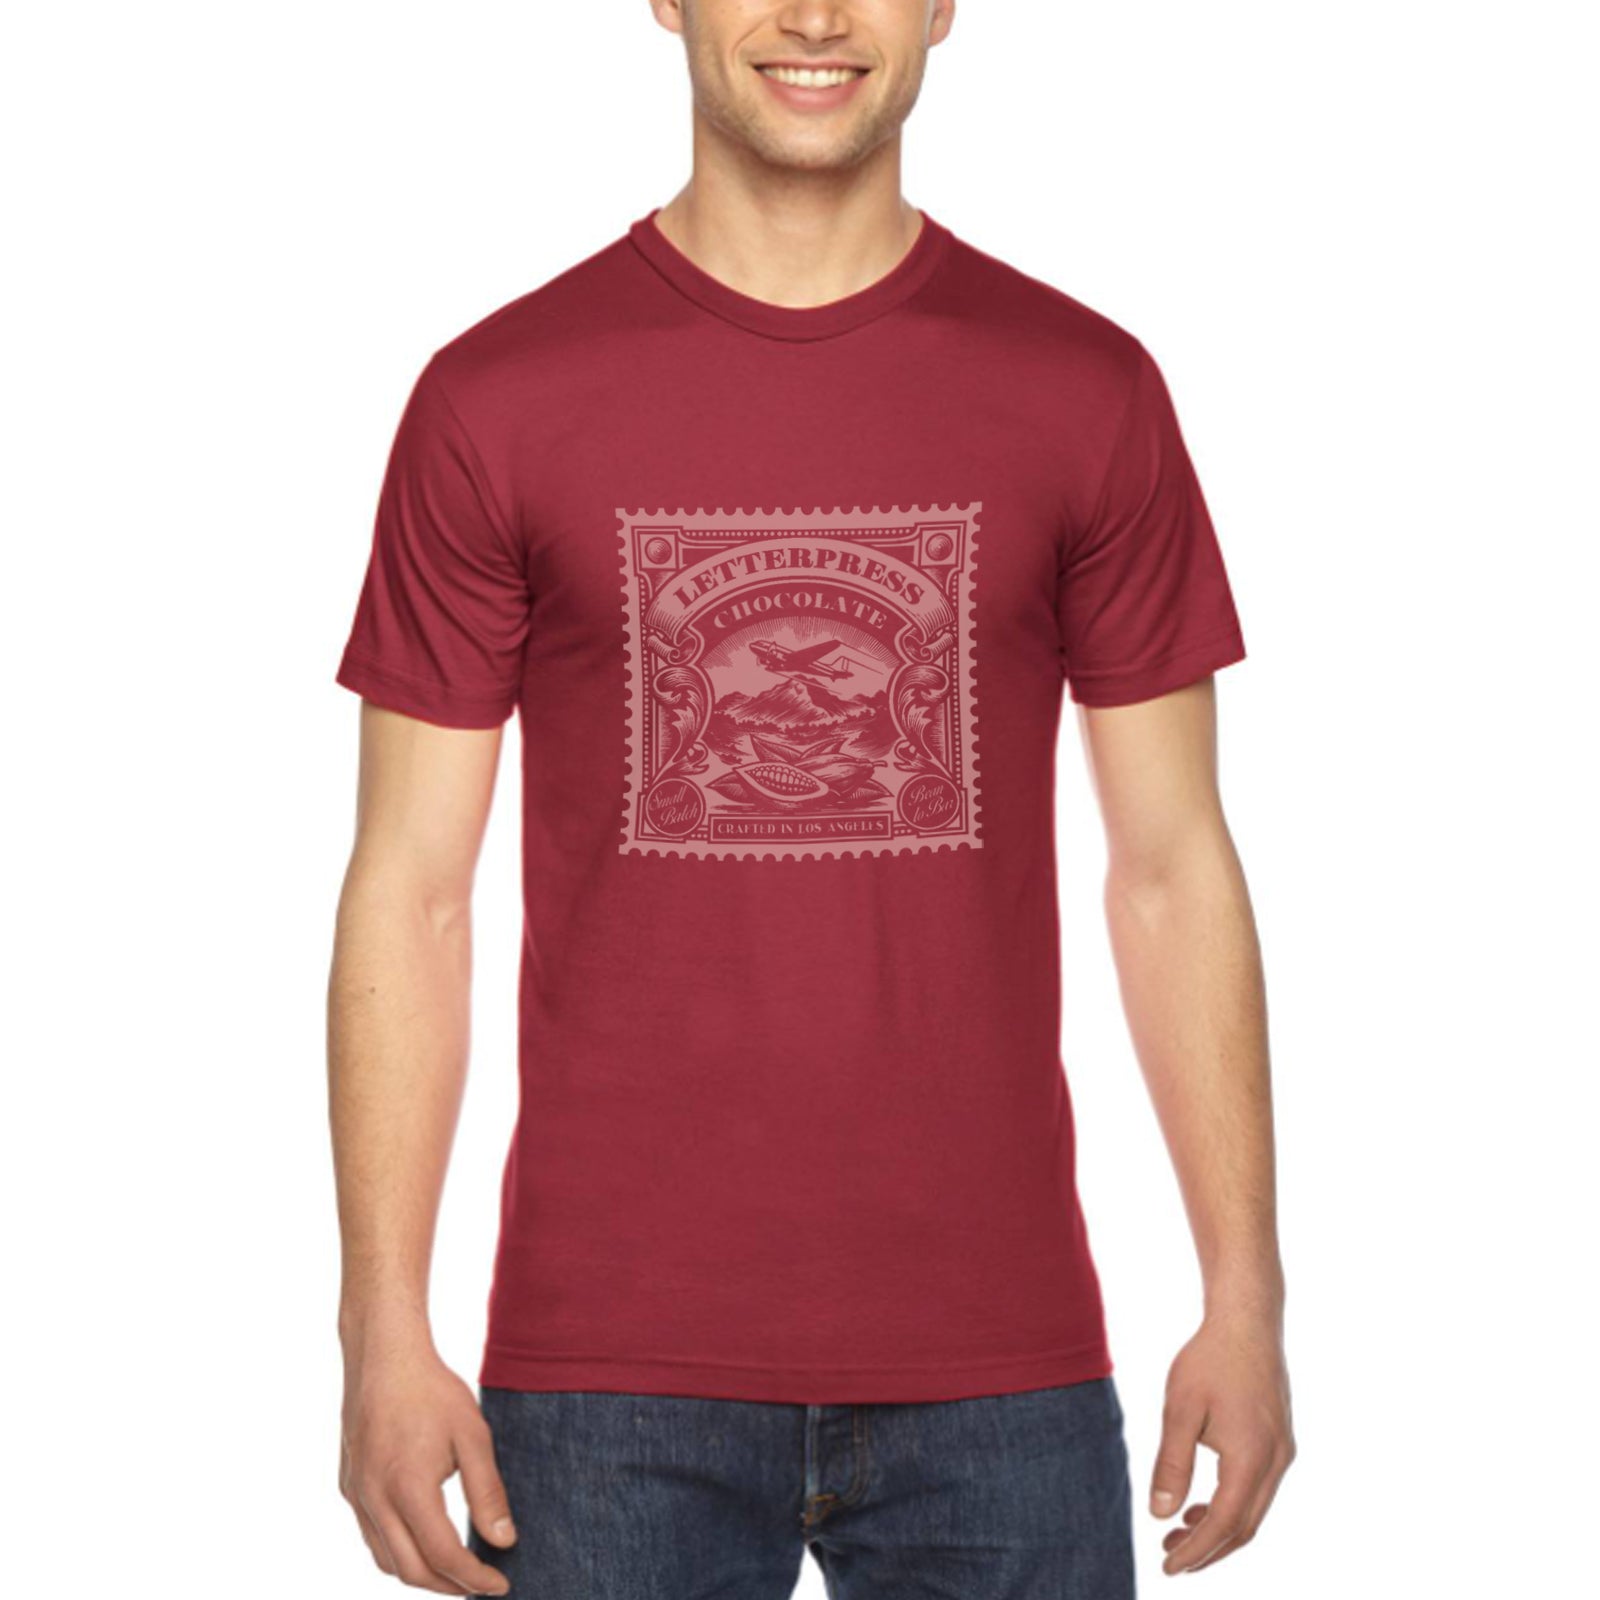 Men's cranberry - A man wearing a tshirt with a white letterpress chocolate logo